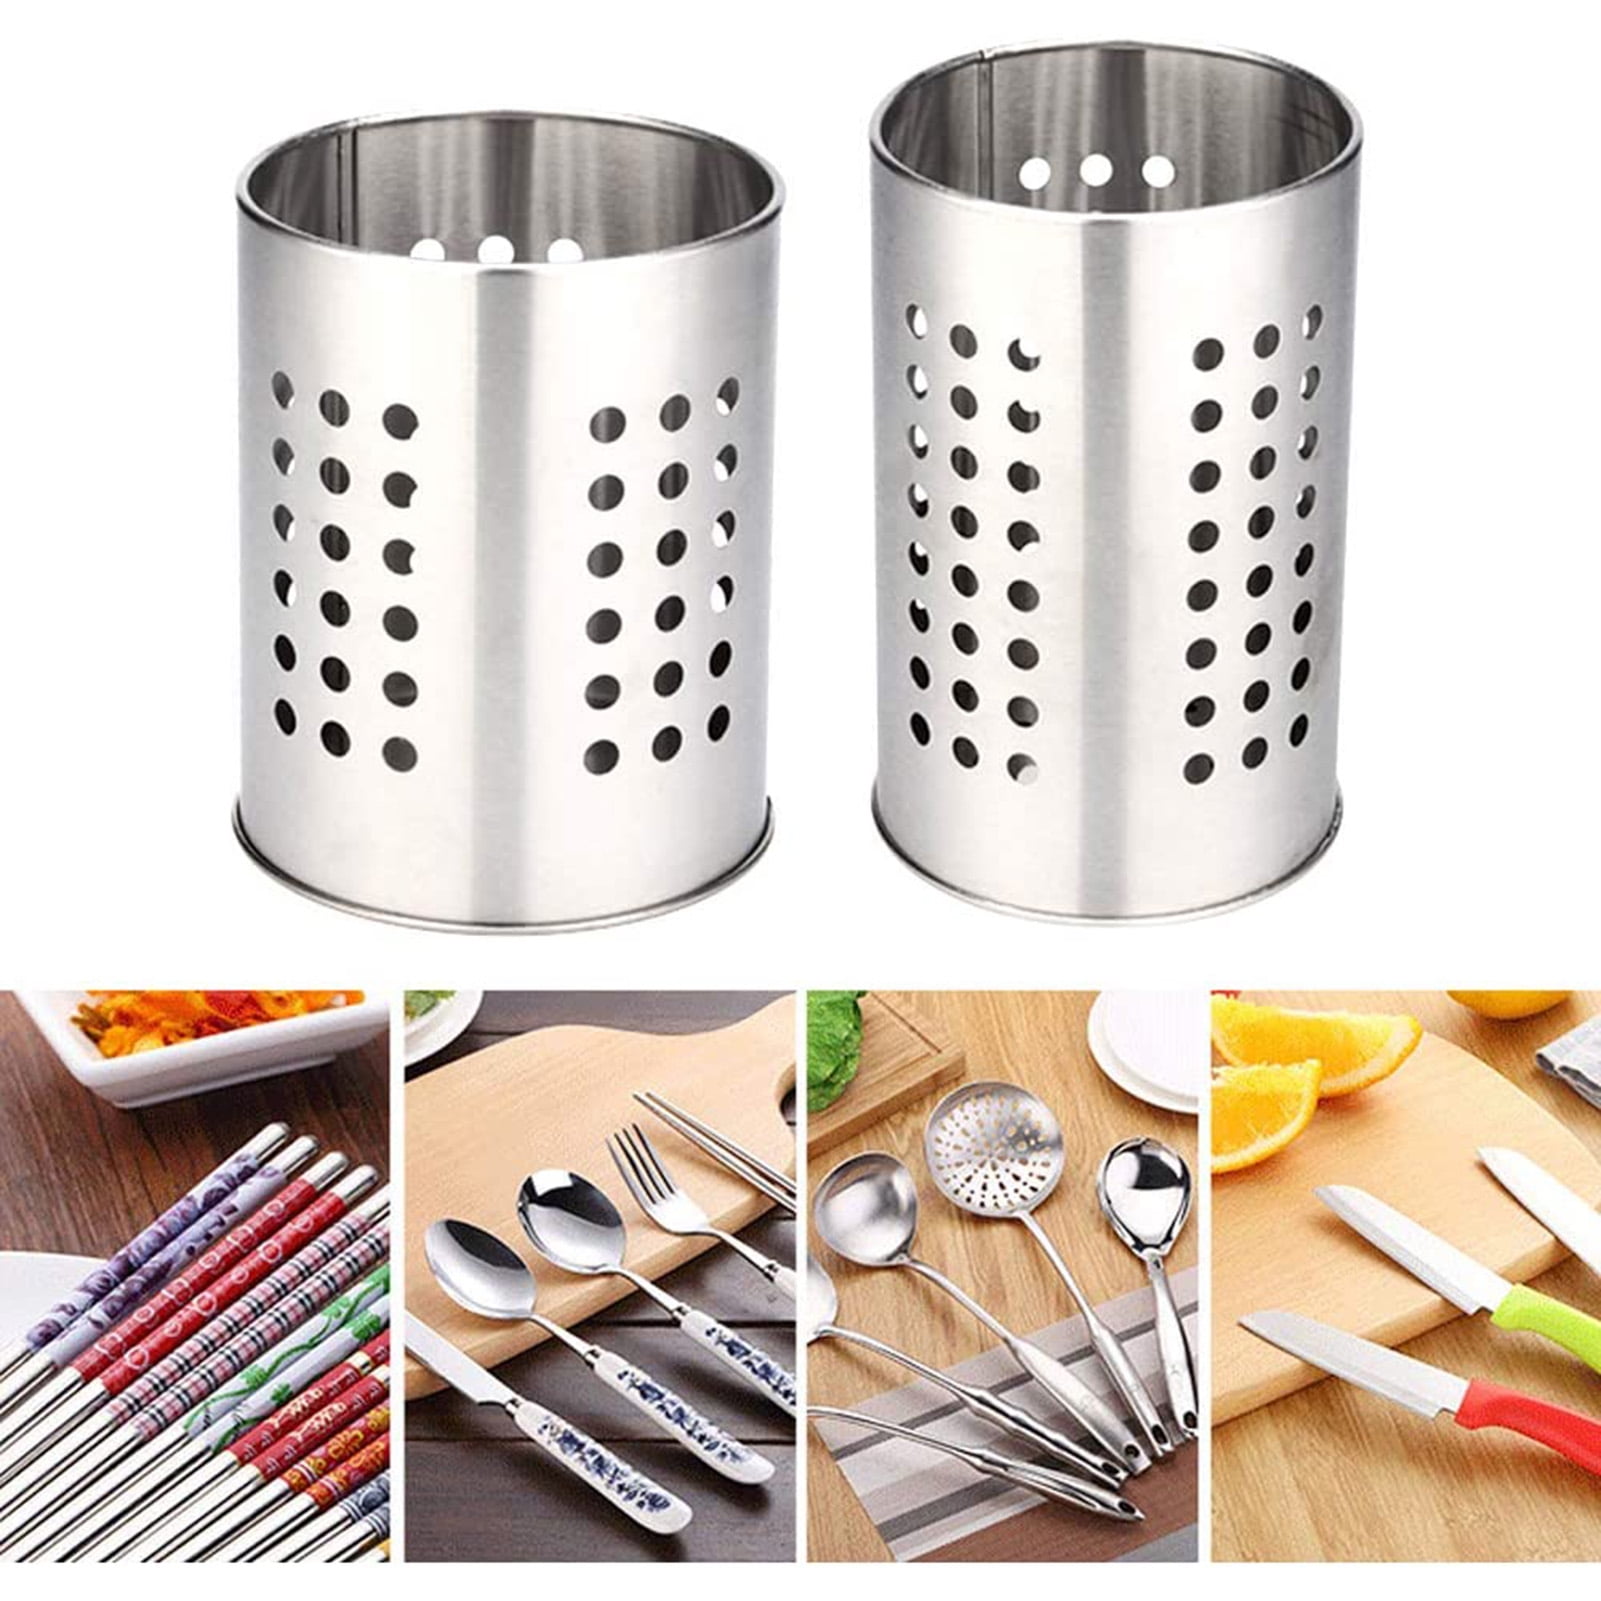 Cook N Home 02639 Stainless Steel Utensil Holder Jumbo 2pc Set 5.5-Inch x 6.3-Inch and 6.3-Inch x 7.08-Inch Silver